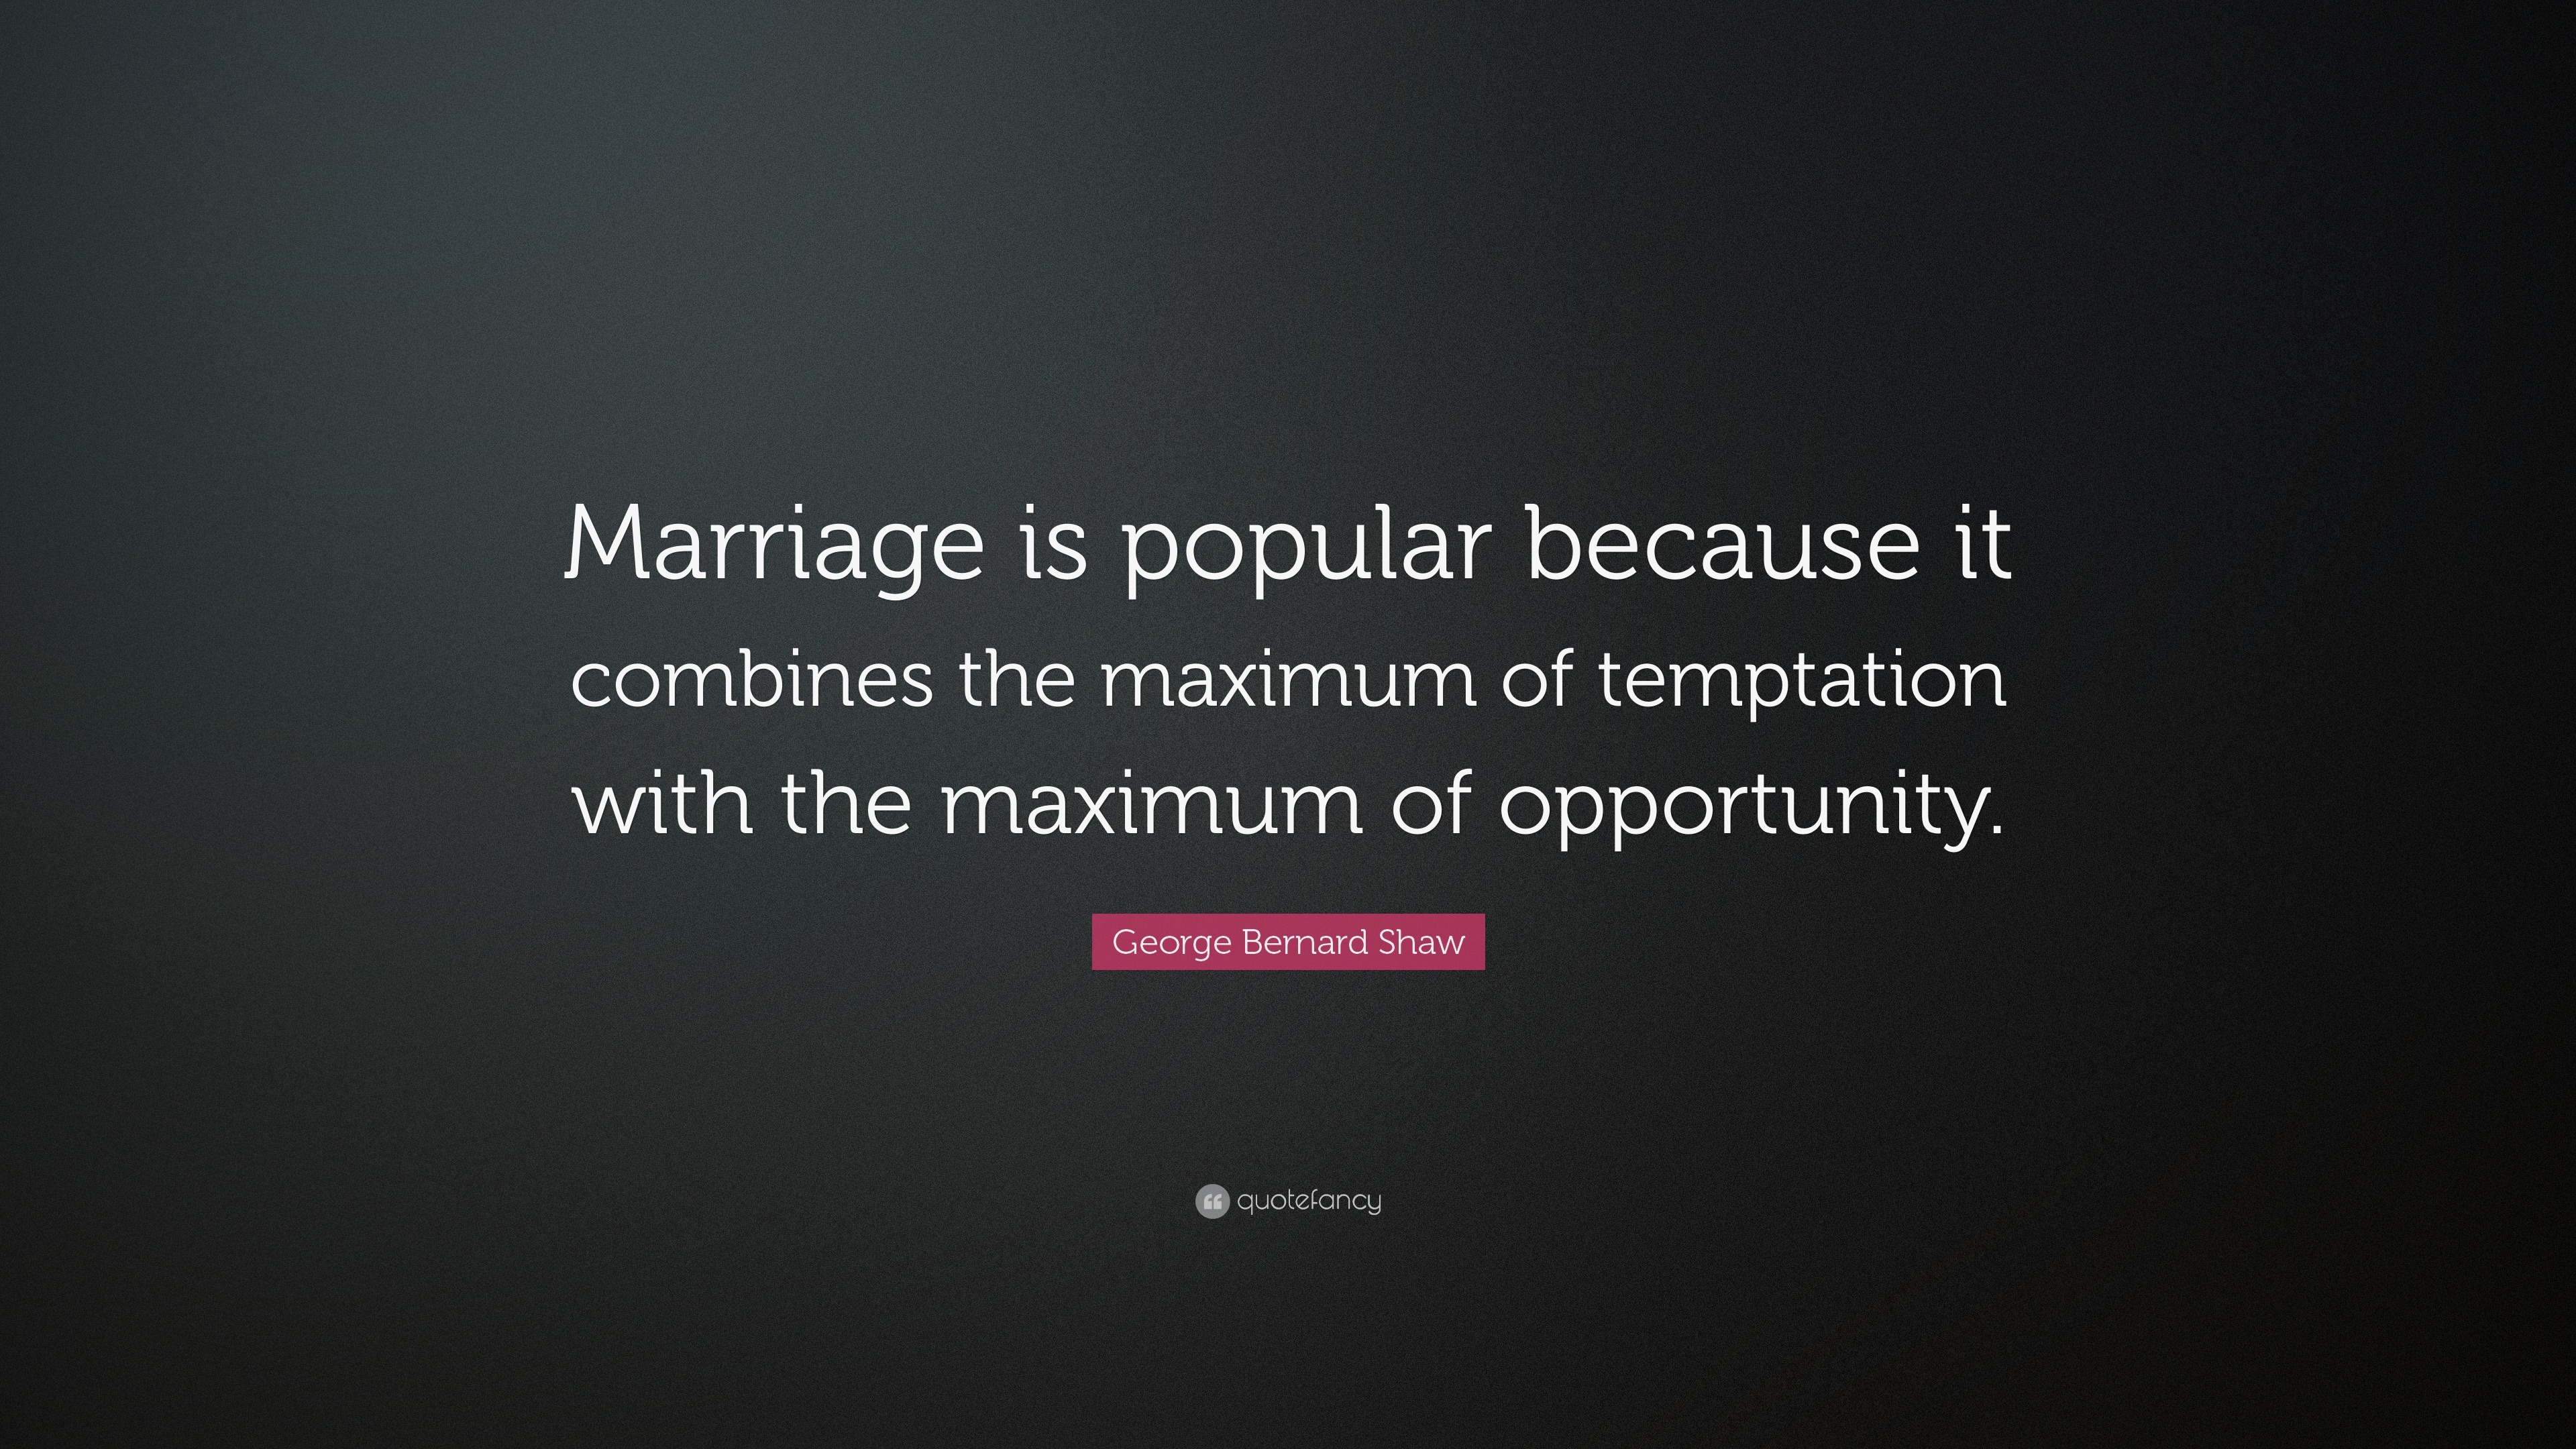 George Bernard Shaw Quote: “Marriage is popular because it combines the ...